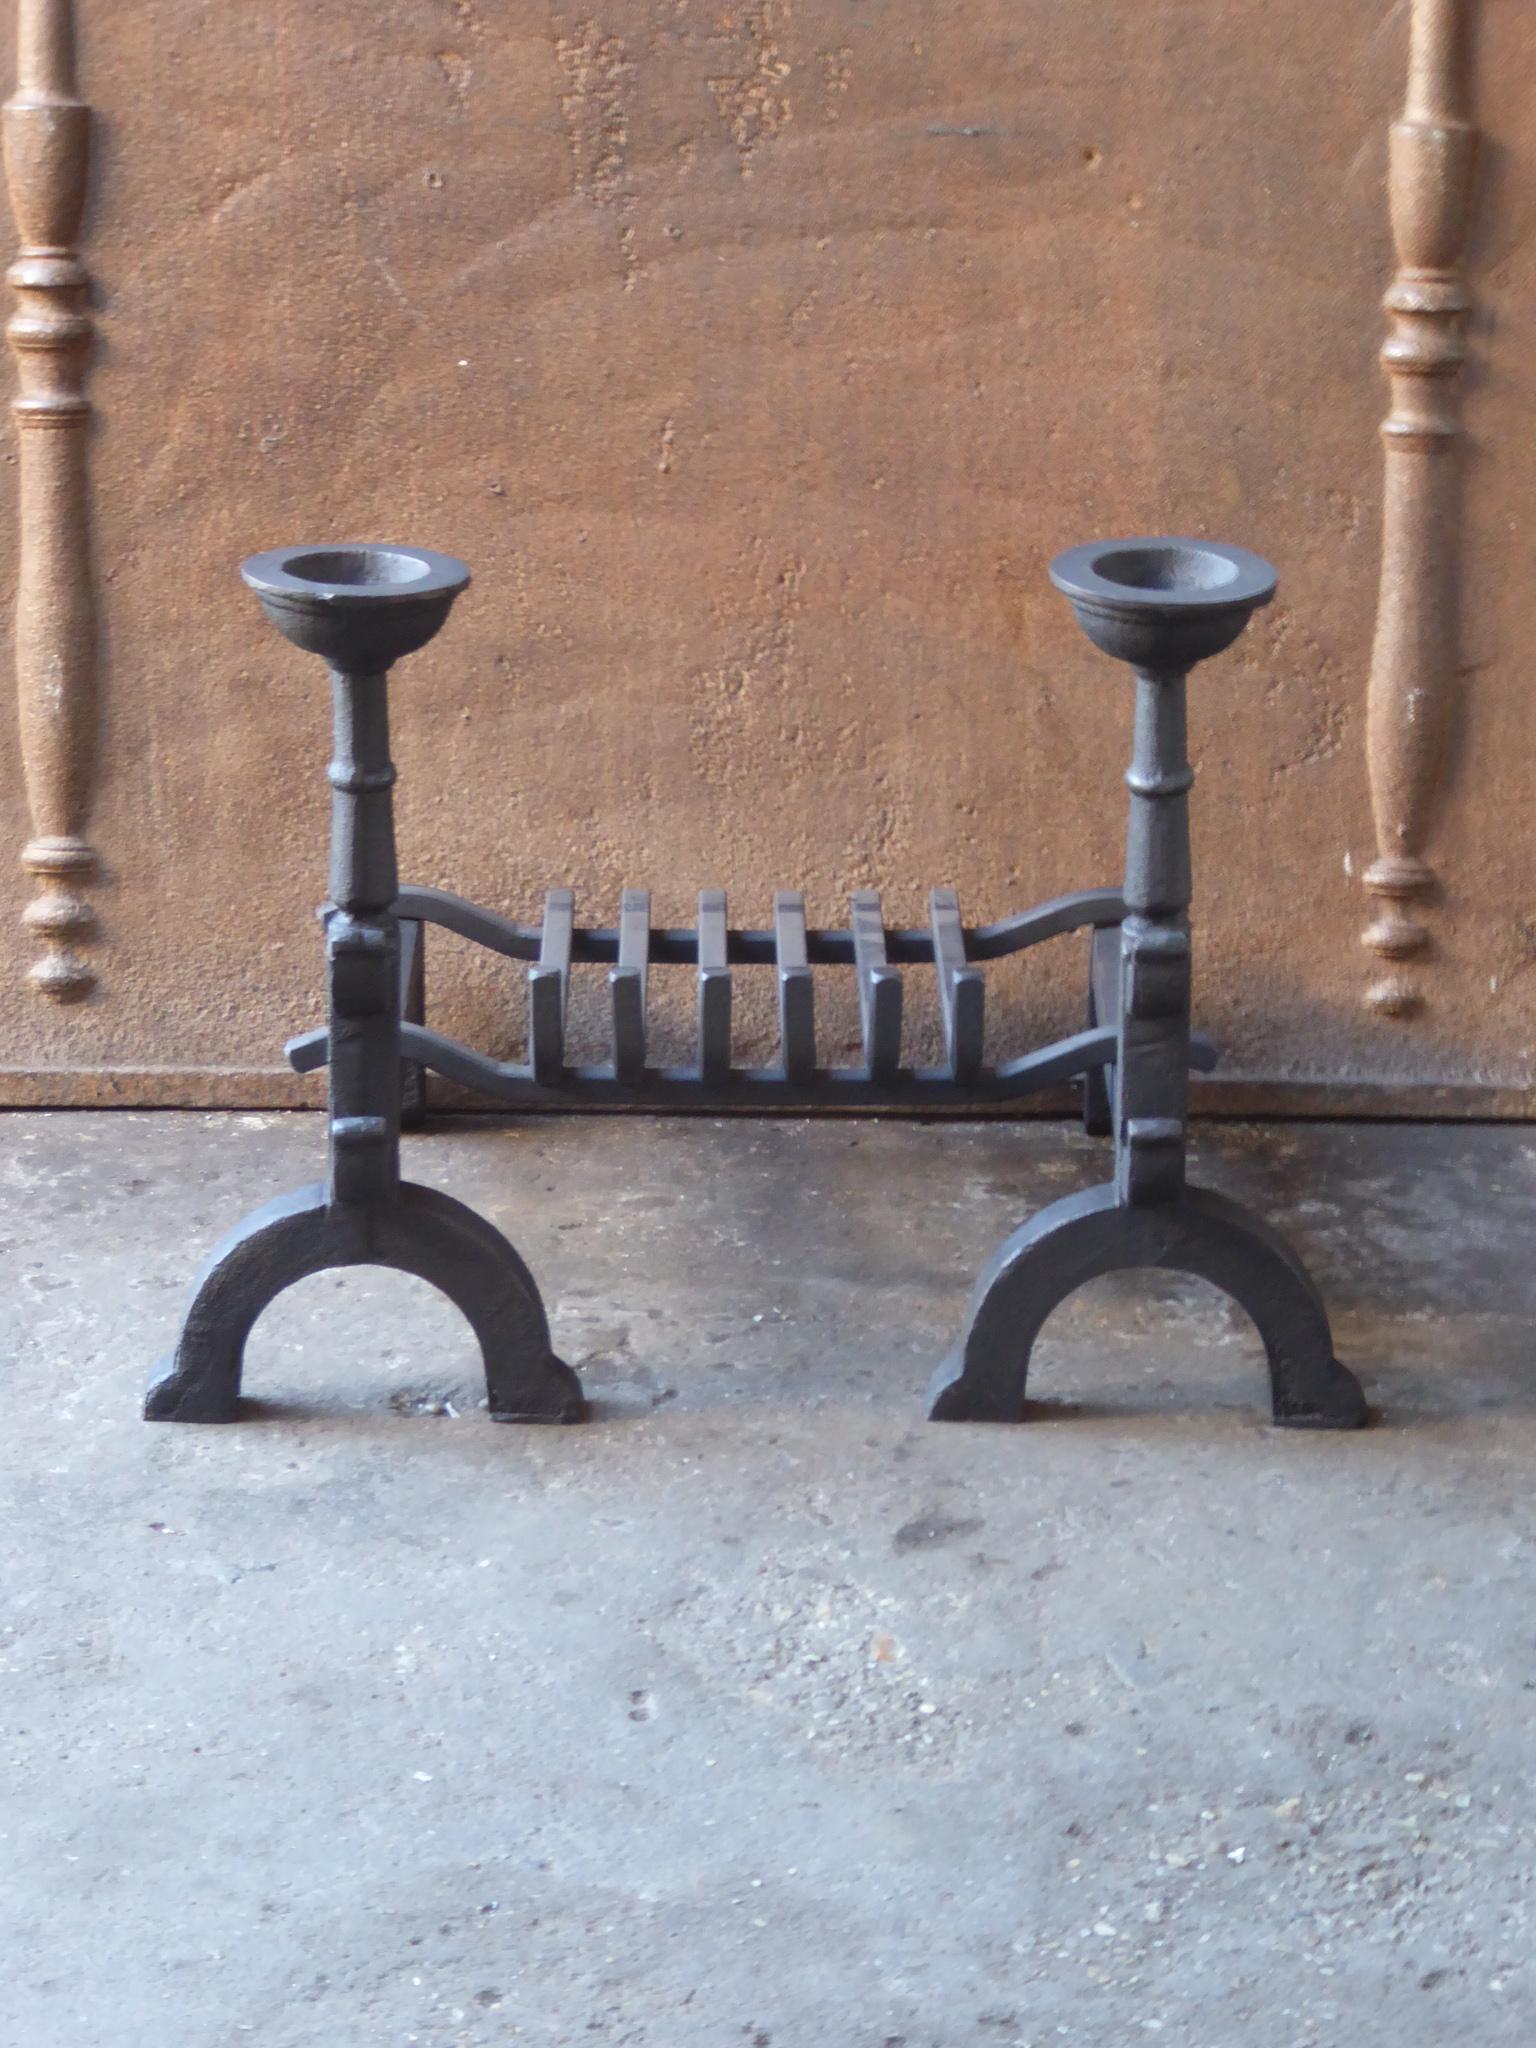 20th century French Neo-gothic fireplace basket - fire basket made of wrought iron and cast iron. The basket is in a good condition and is fully functional. The total width of the front of the fireplace grate is 60.0 cm or 23.6 inch.